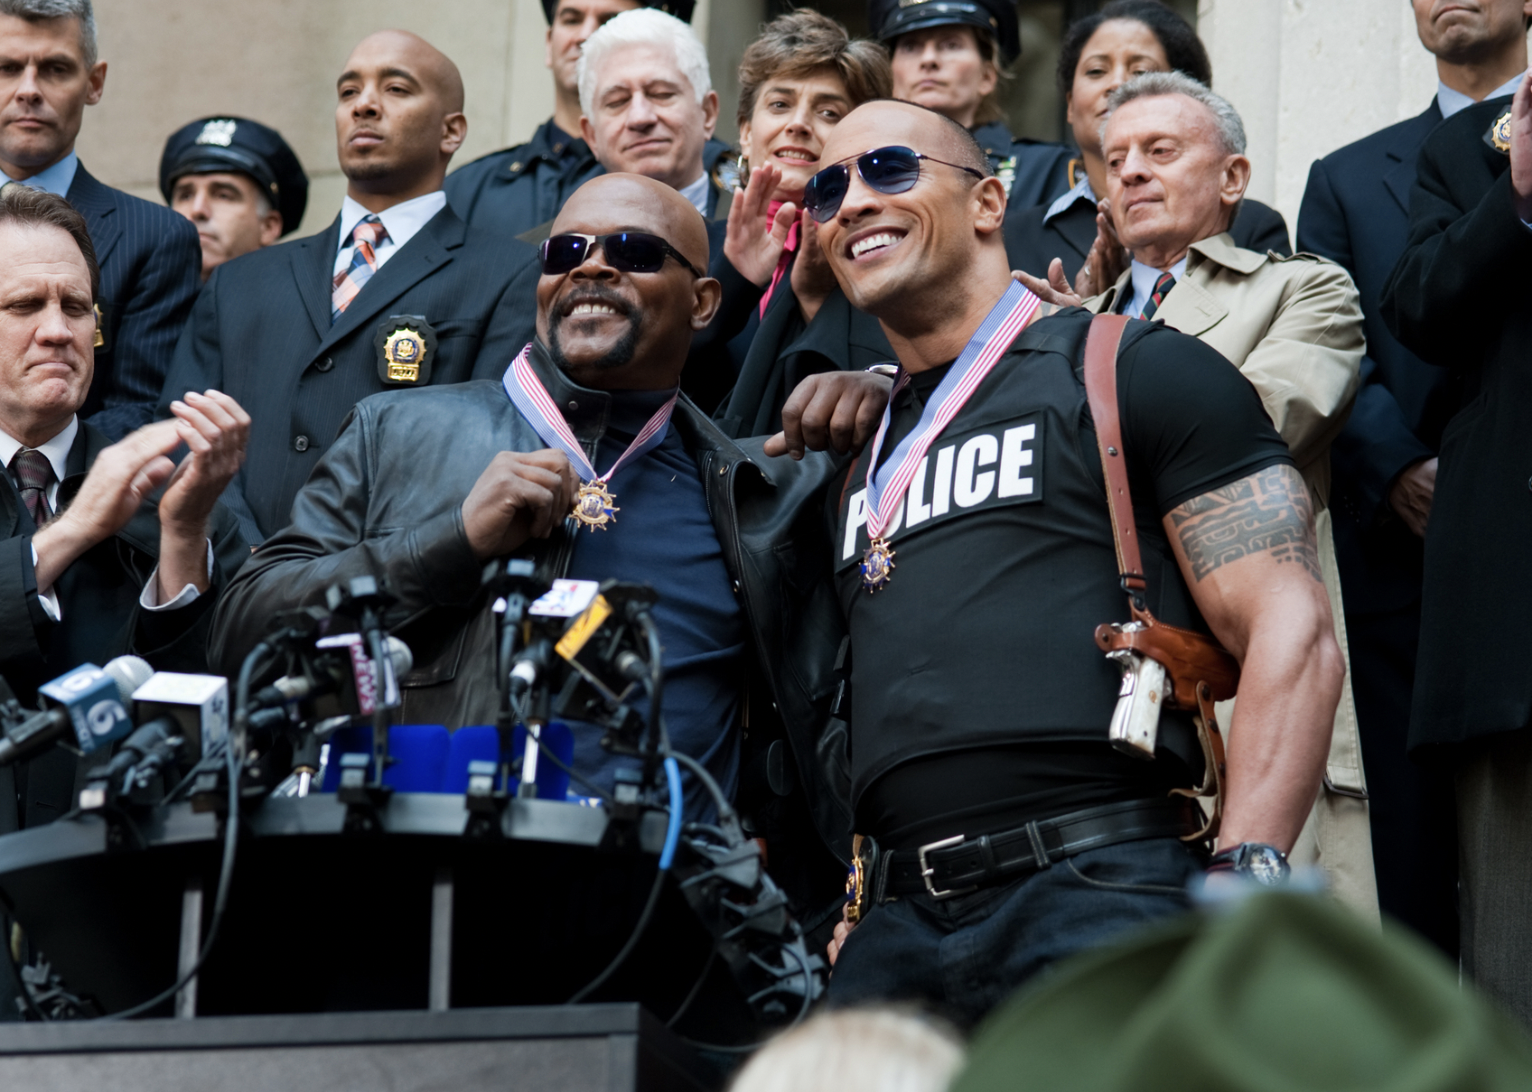 Samuel L. Jackson and Dwayne Johnson in "The Other Guys"